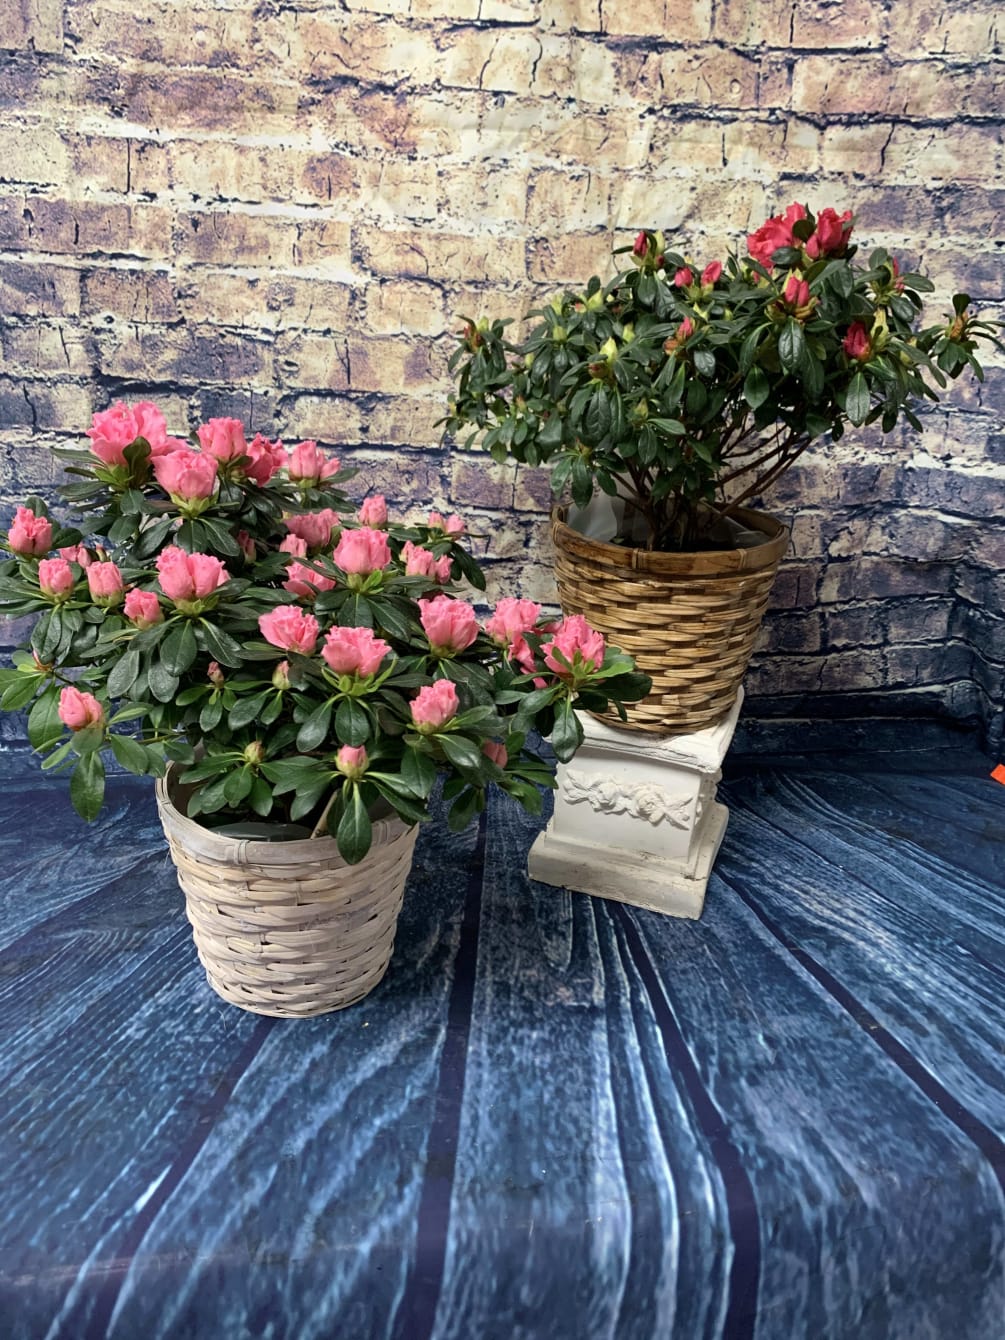 Awesome Azalea! This beautiful potted plant displays the delicate flowers that have